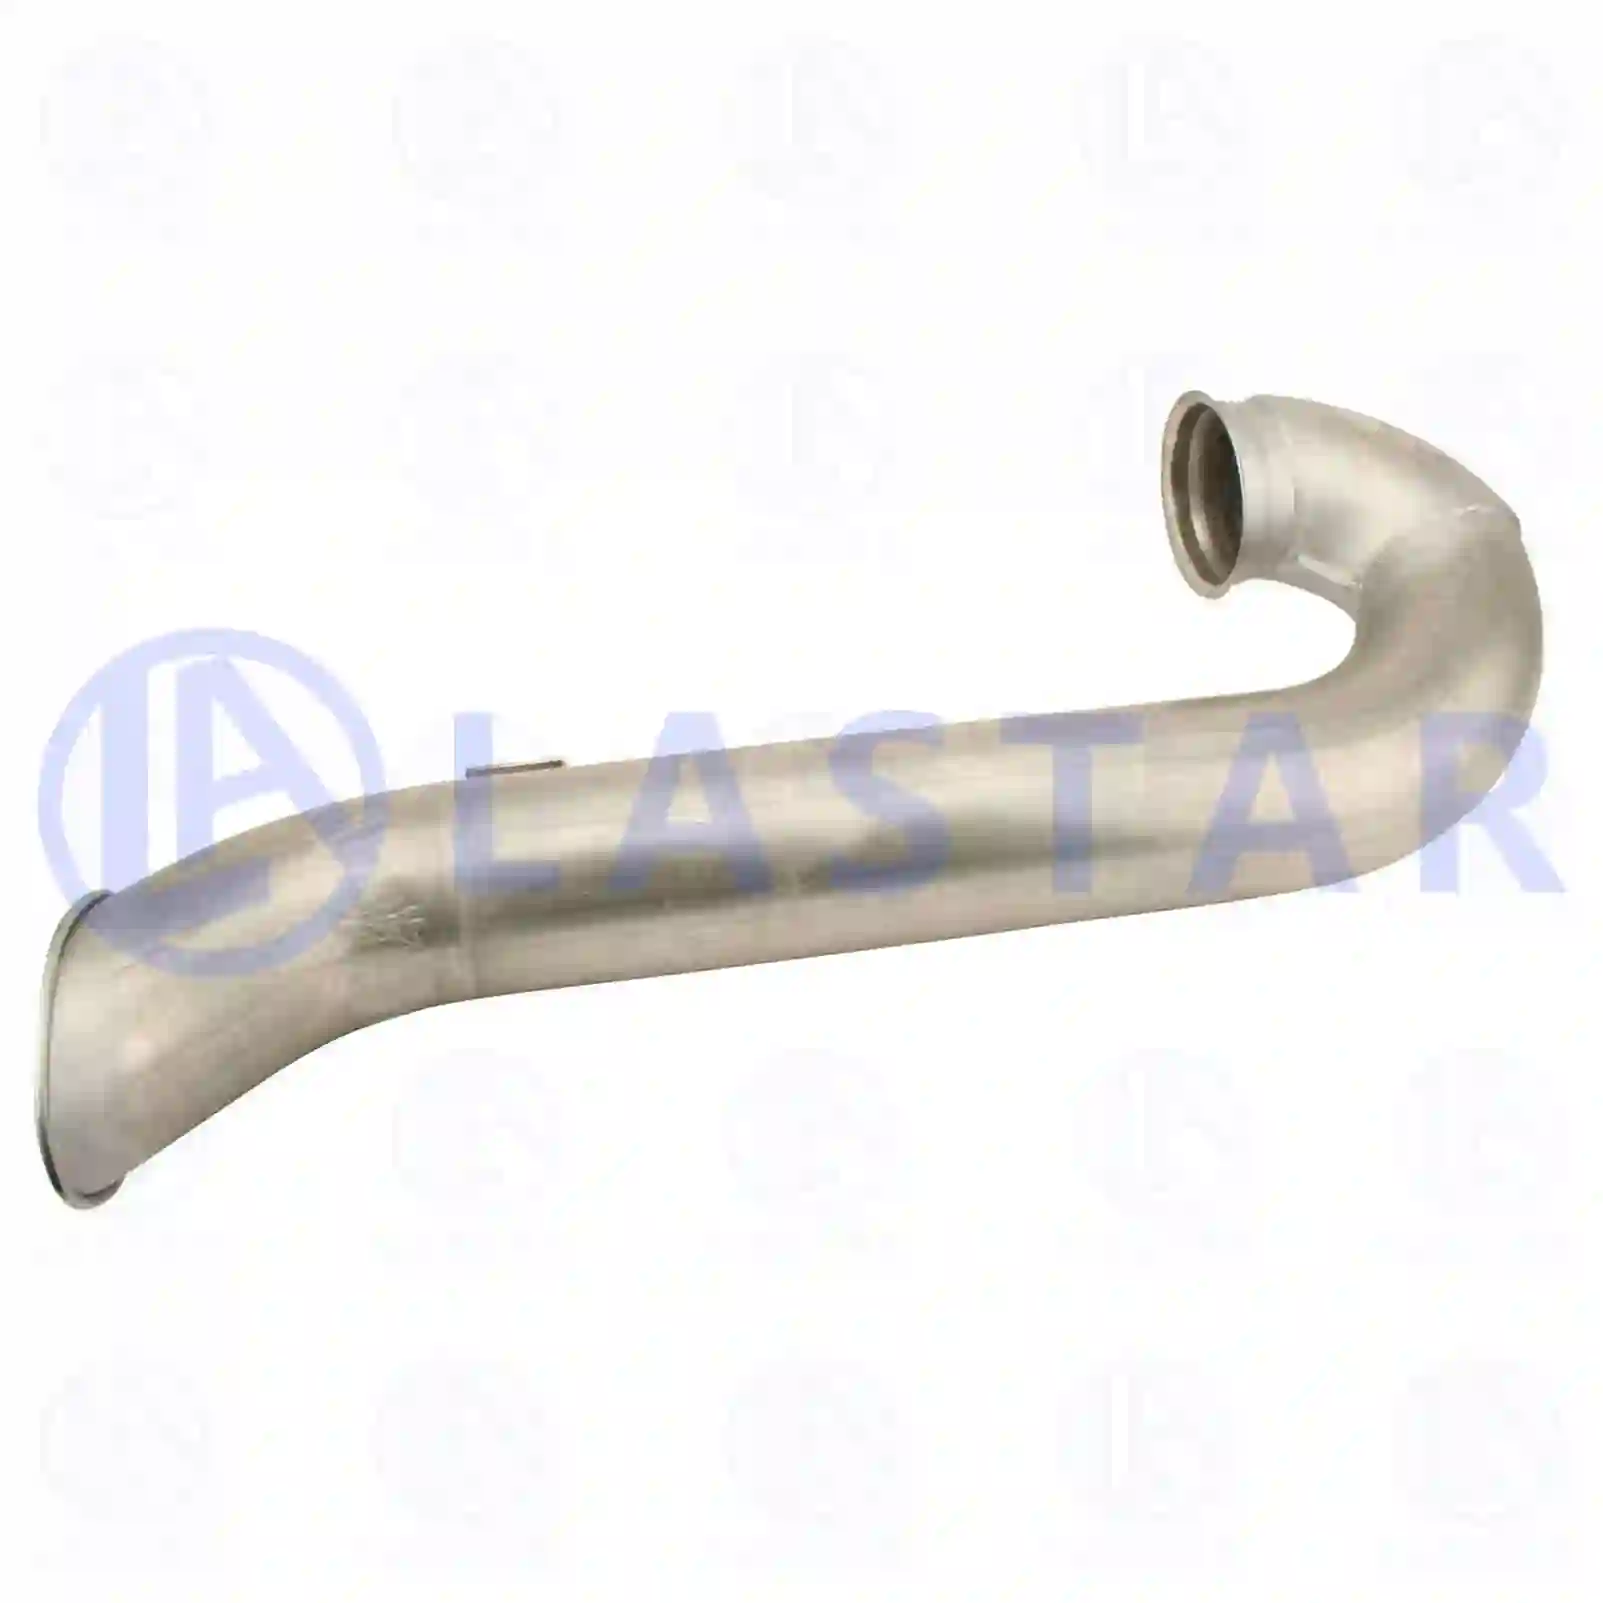 End pipe, 77706478, 1331936 ||  77706478 Lastar Spare Part | Truck Spare Parts, Auotomotive Spare Parts End pipe, 77706478, 1331936 ||  77706478 Lastar Spare Part | Truck Spare Parts, Auotomotive Spare Parts